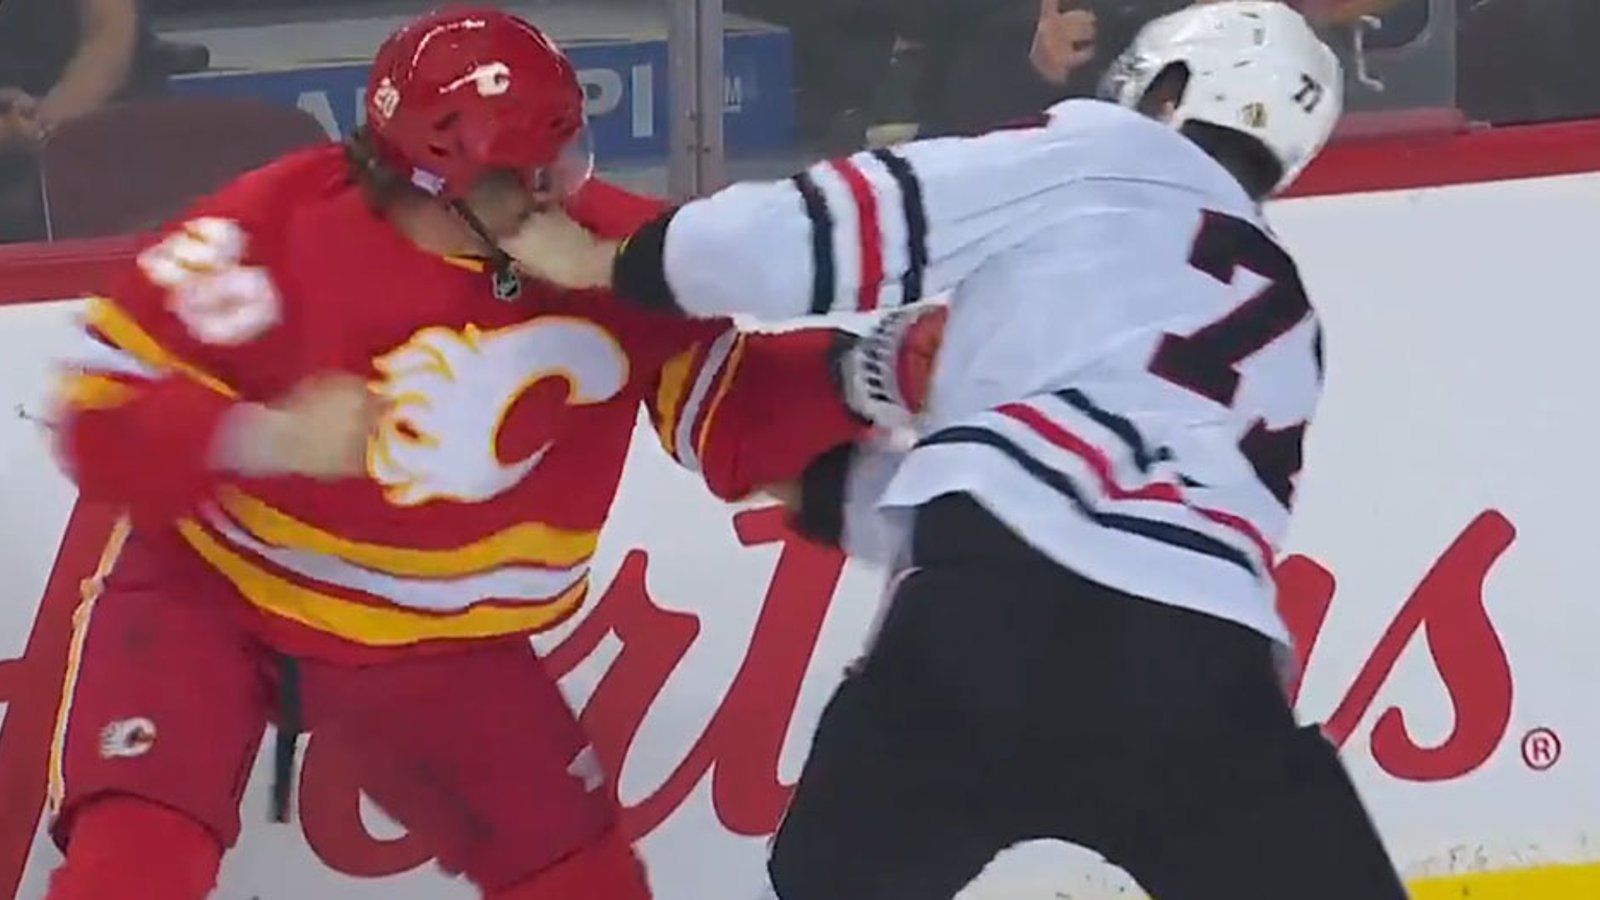 WATCH: Kirby Dach tosses absolute Bombs in his 1st career NHL fight